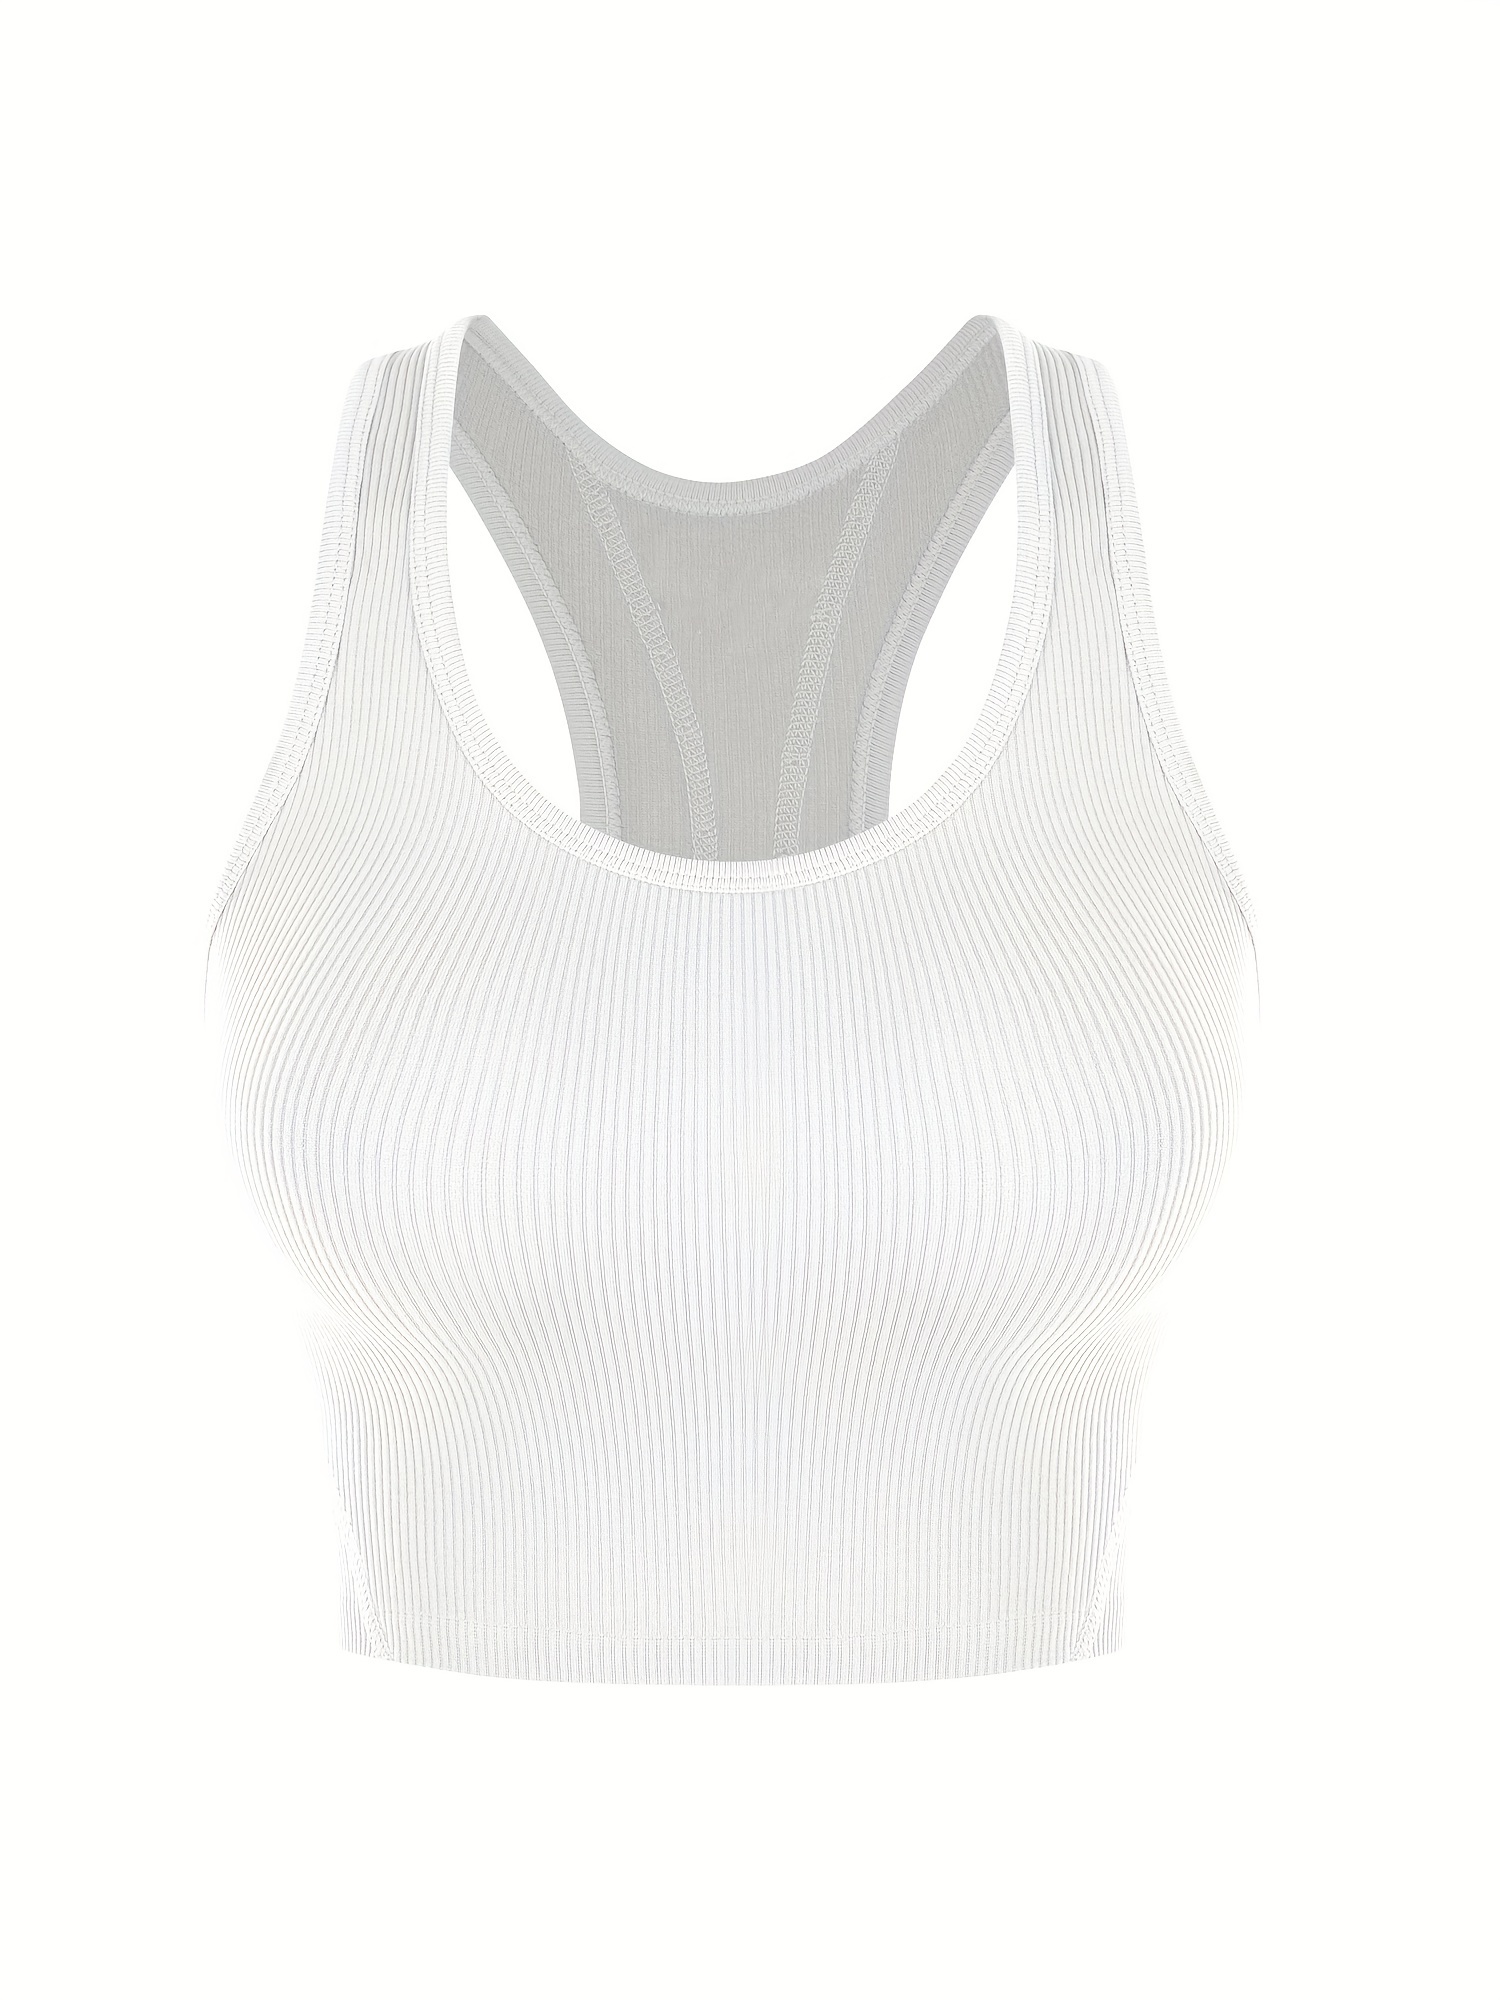 EHQJNJ Tank Top with Built in Bra for Women Women's Simple Knot Crop  Knitted Vest Top Womens Camisole Tank Tops Nylon/Spandex White Tank Tops  for